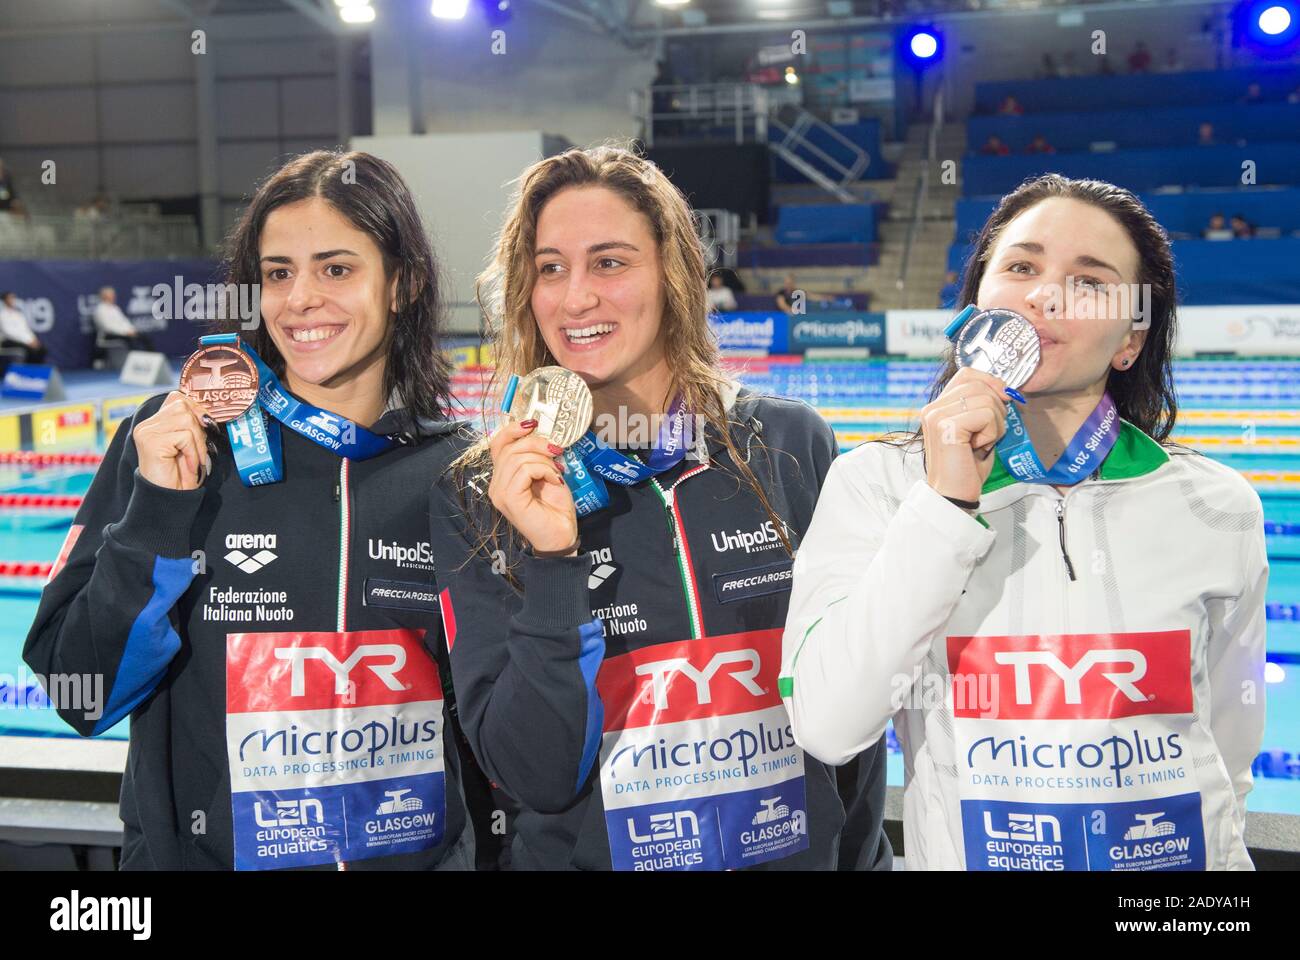 Italy S Rita Martina Caramignoli Bronze Italy S Simona Quadarella Gold And Hungary S Ajna Kesely Silver After The Medal Ceremony For The Women S 800m Freestyle During The European Short Course Swimming Championships At Tollcross